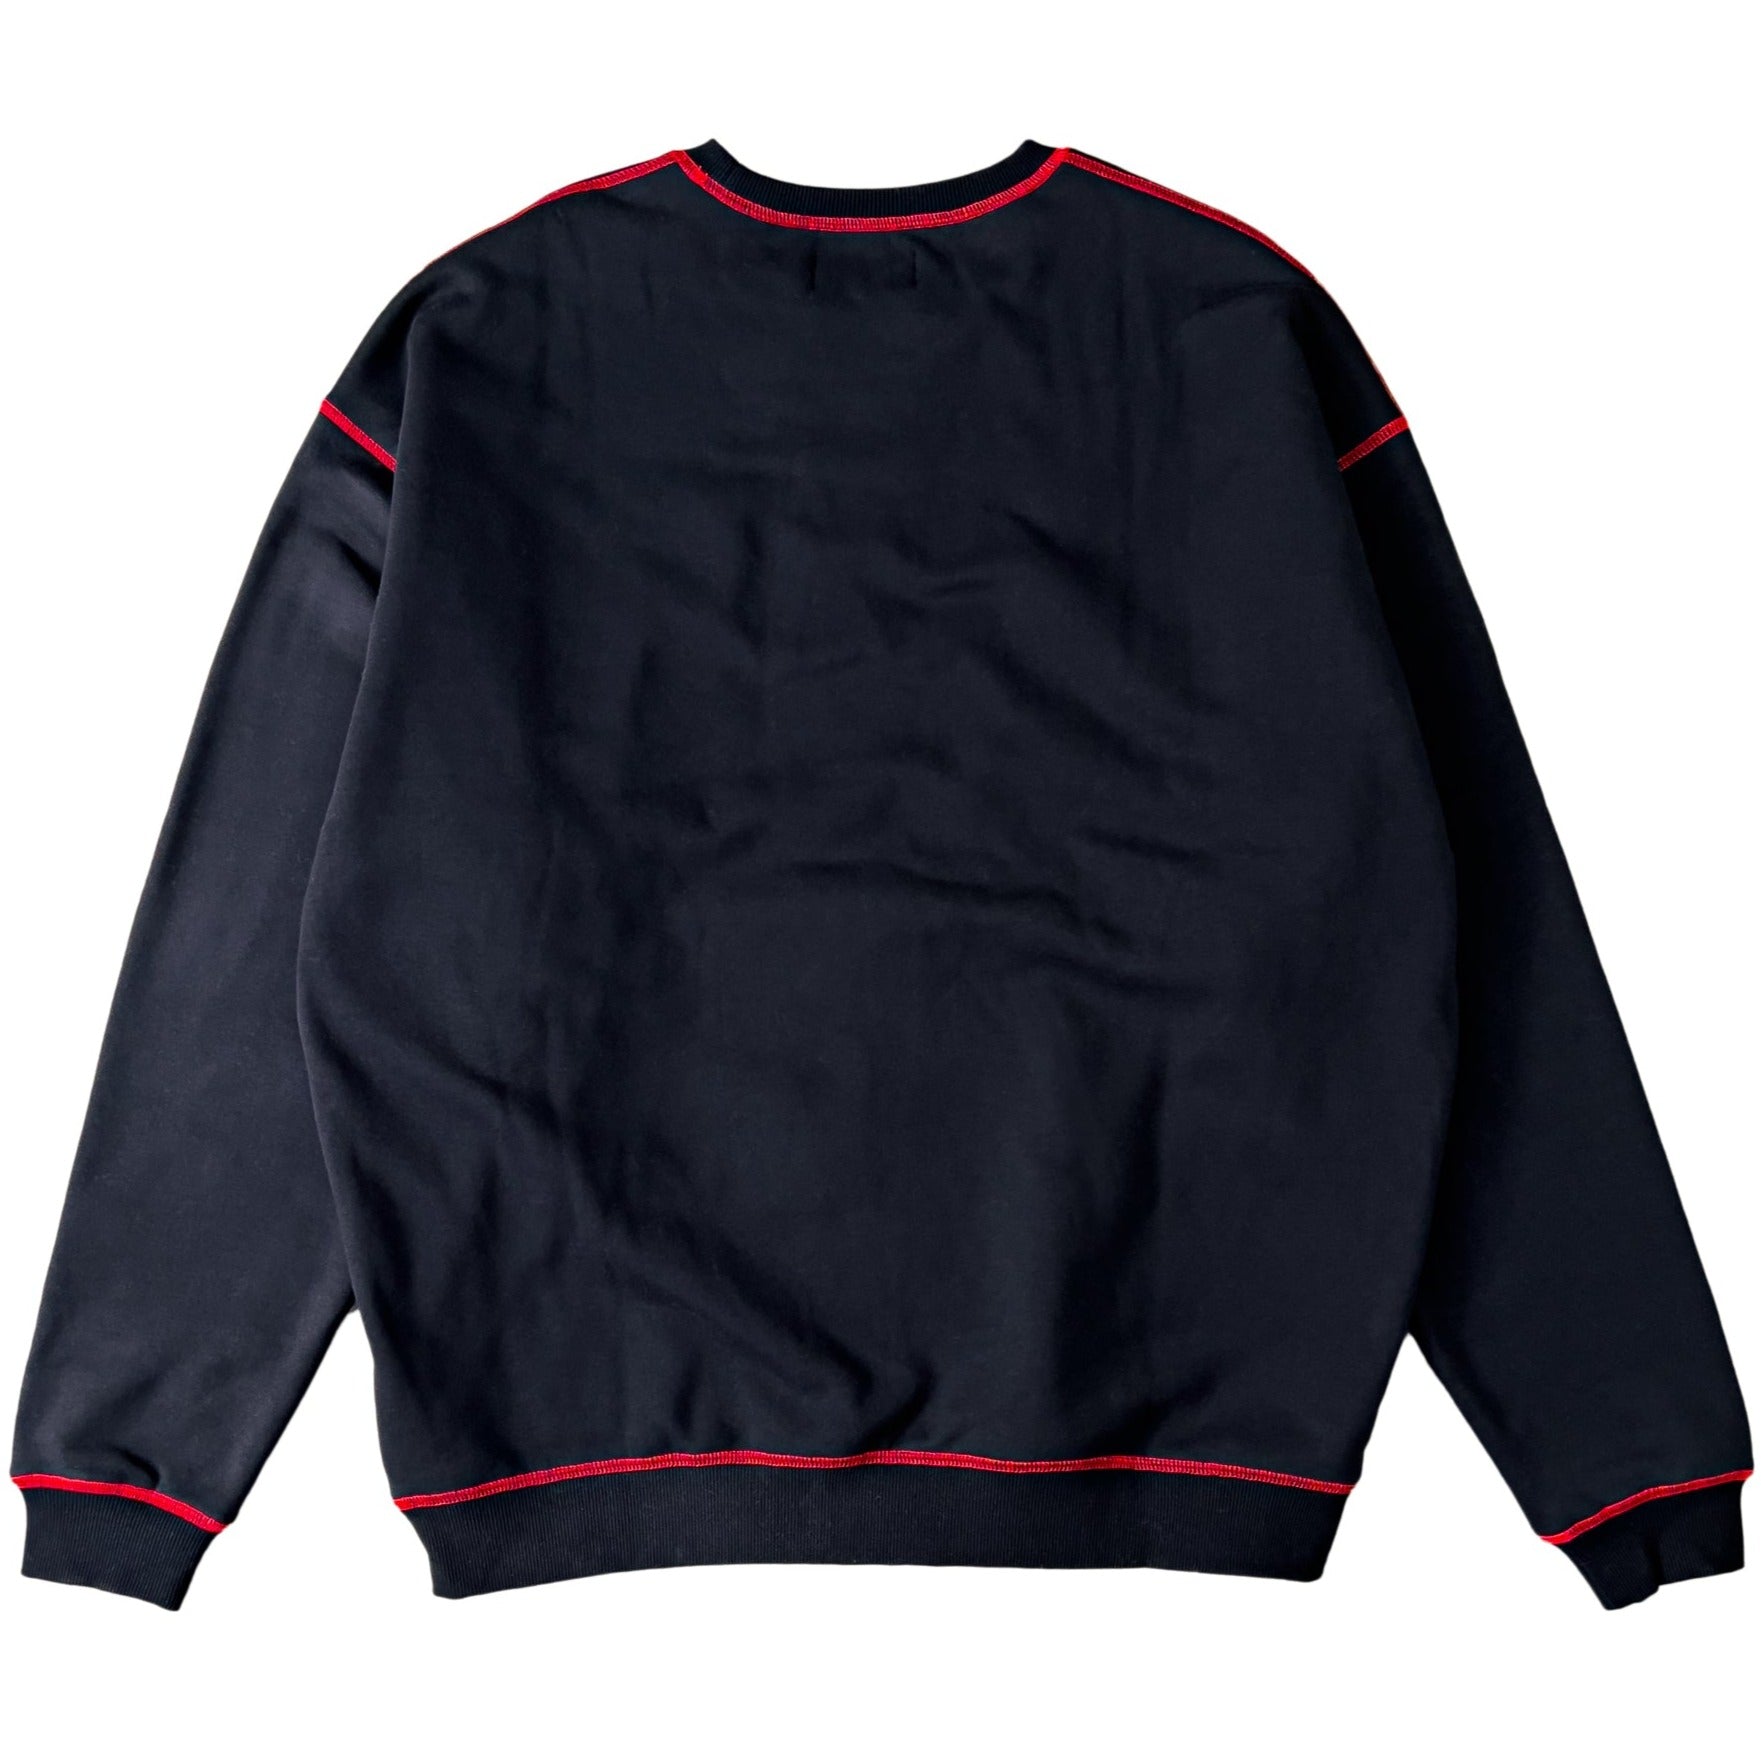 OVERSIZED LUX OUTSEAM CREW NECK - BLACK / RED